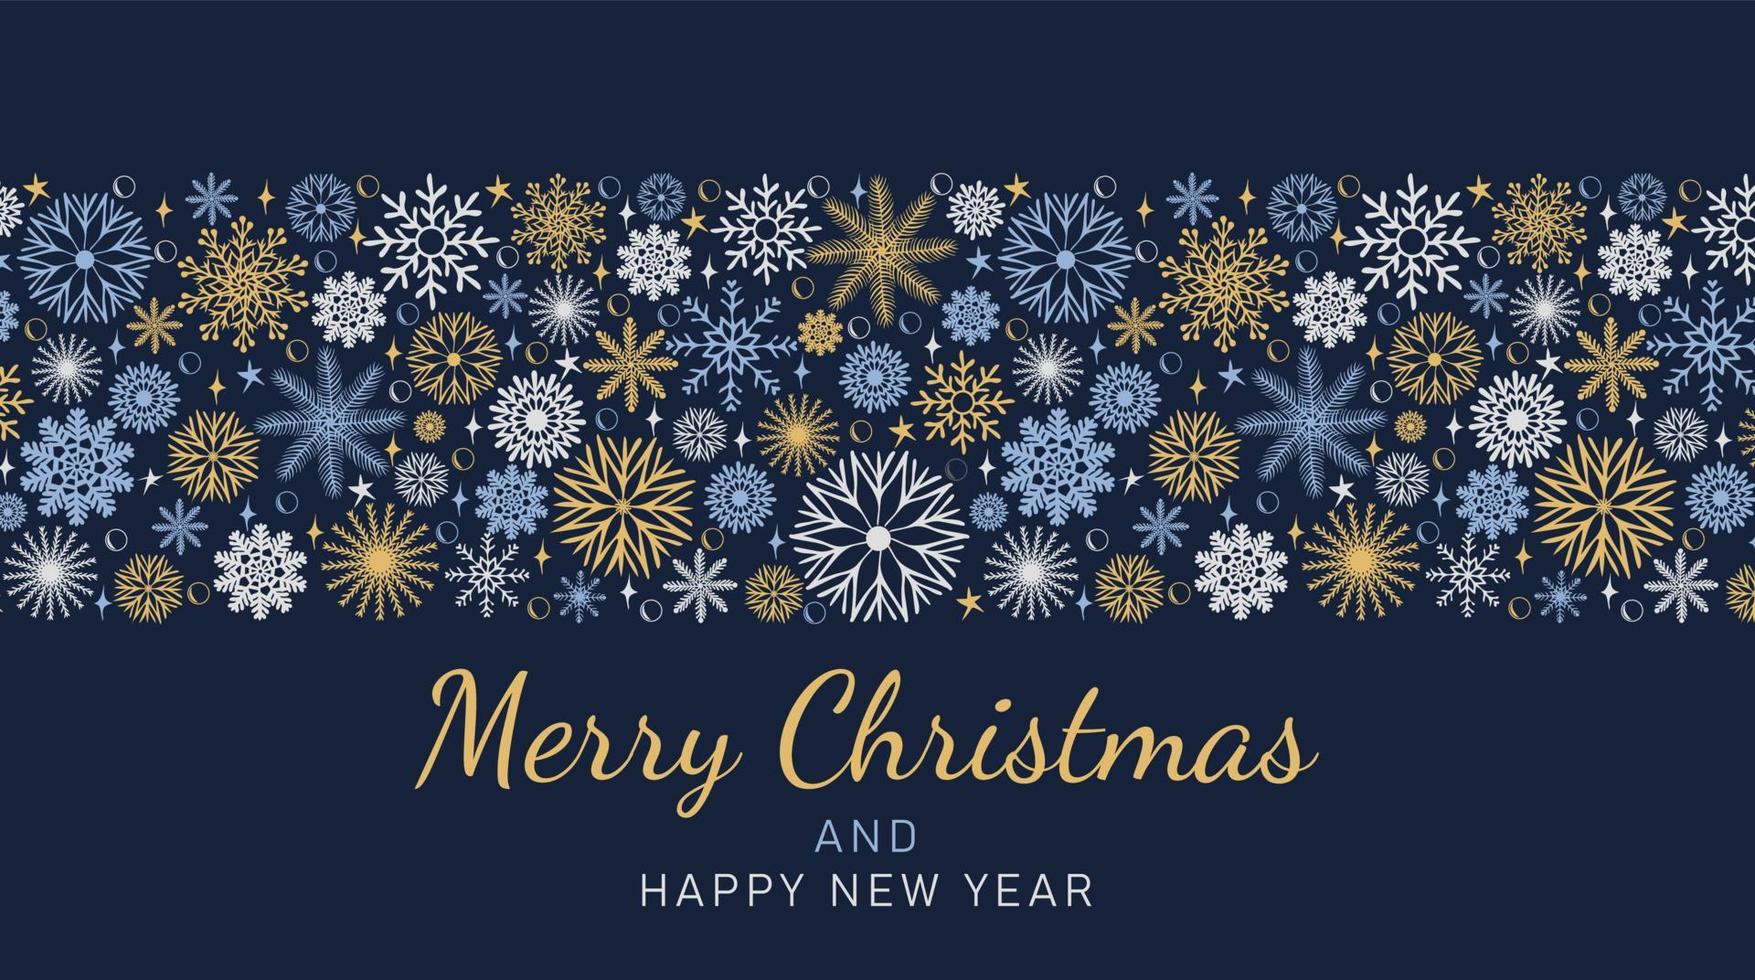 Merry Christmas and Happy New Year festive design. Winter Holidays border made of beautiful snowflakes in modern line art style on dark blue background vector